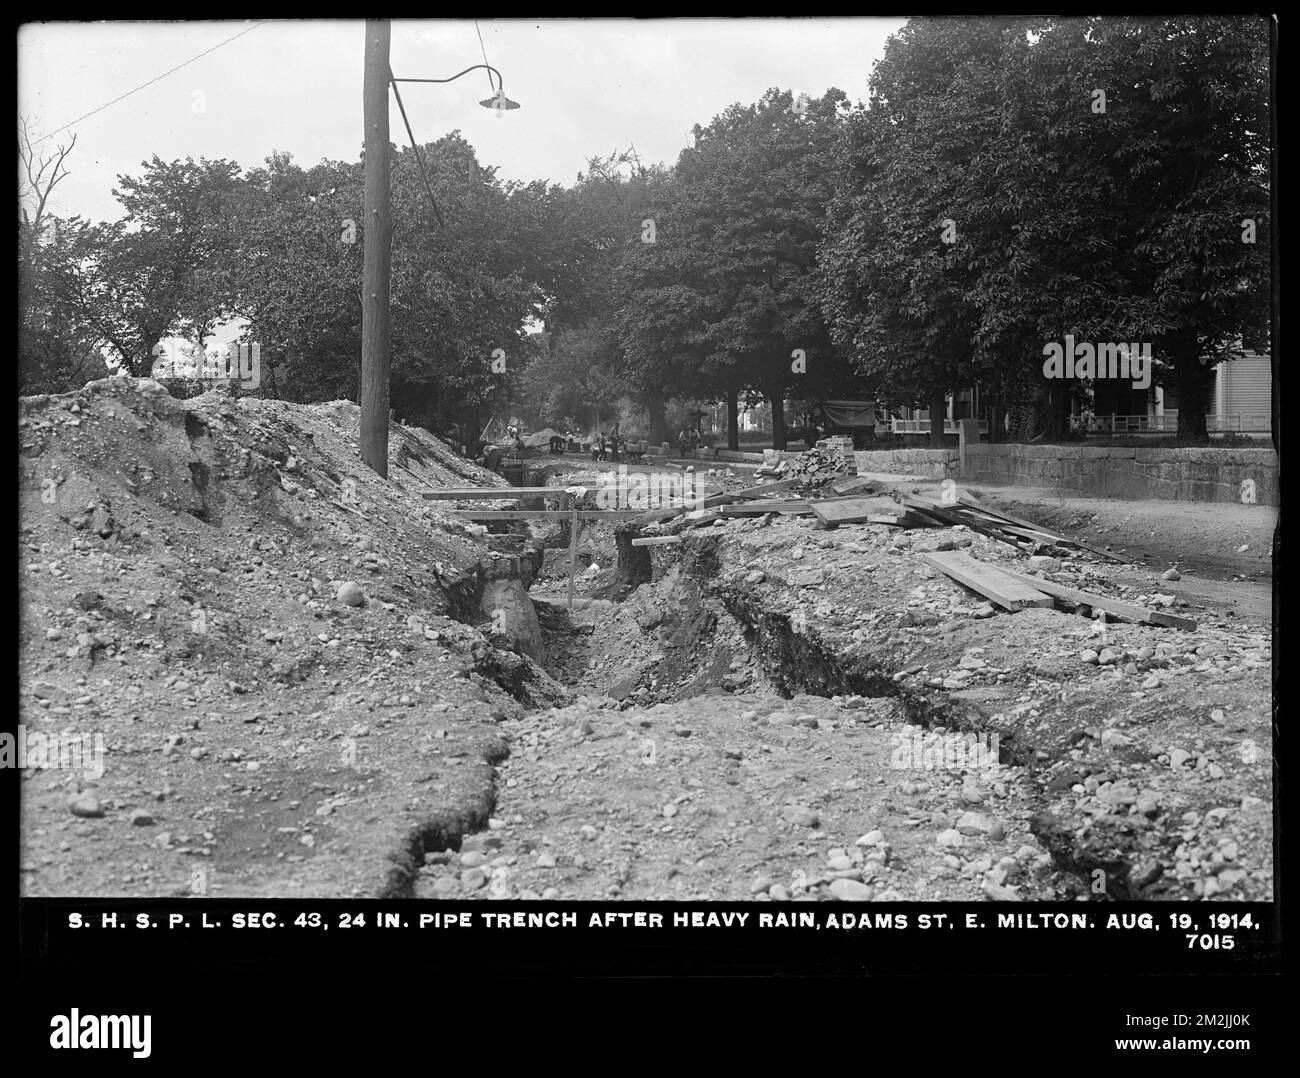 Distribution Department, Southern High Service Pipe Lines, Section 43, 24-inch pipe trench after heavy rain, Adams Street, East Milton, Milton, Mass., Aug. 19, 1914 , waterworks, pipes conduits, construction sites Stock Photo